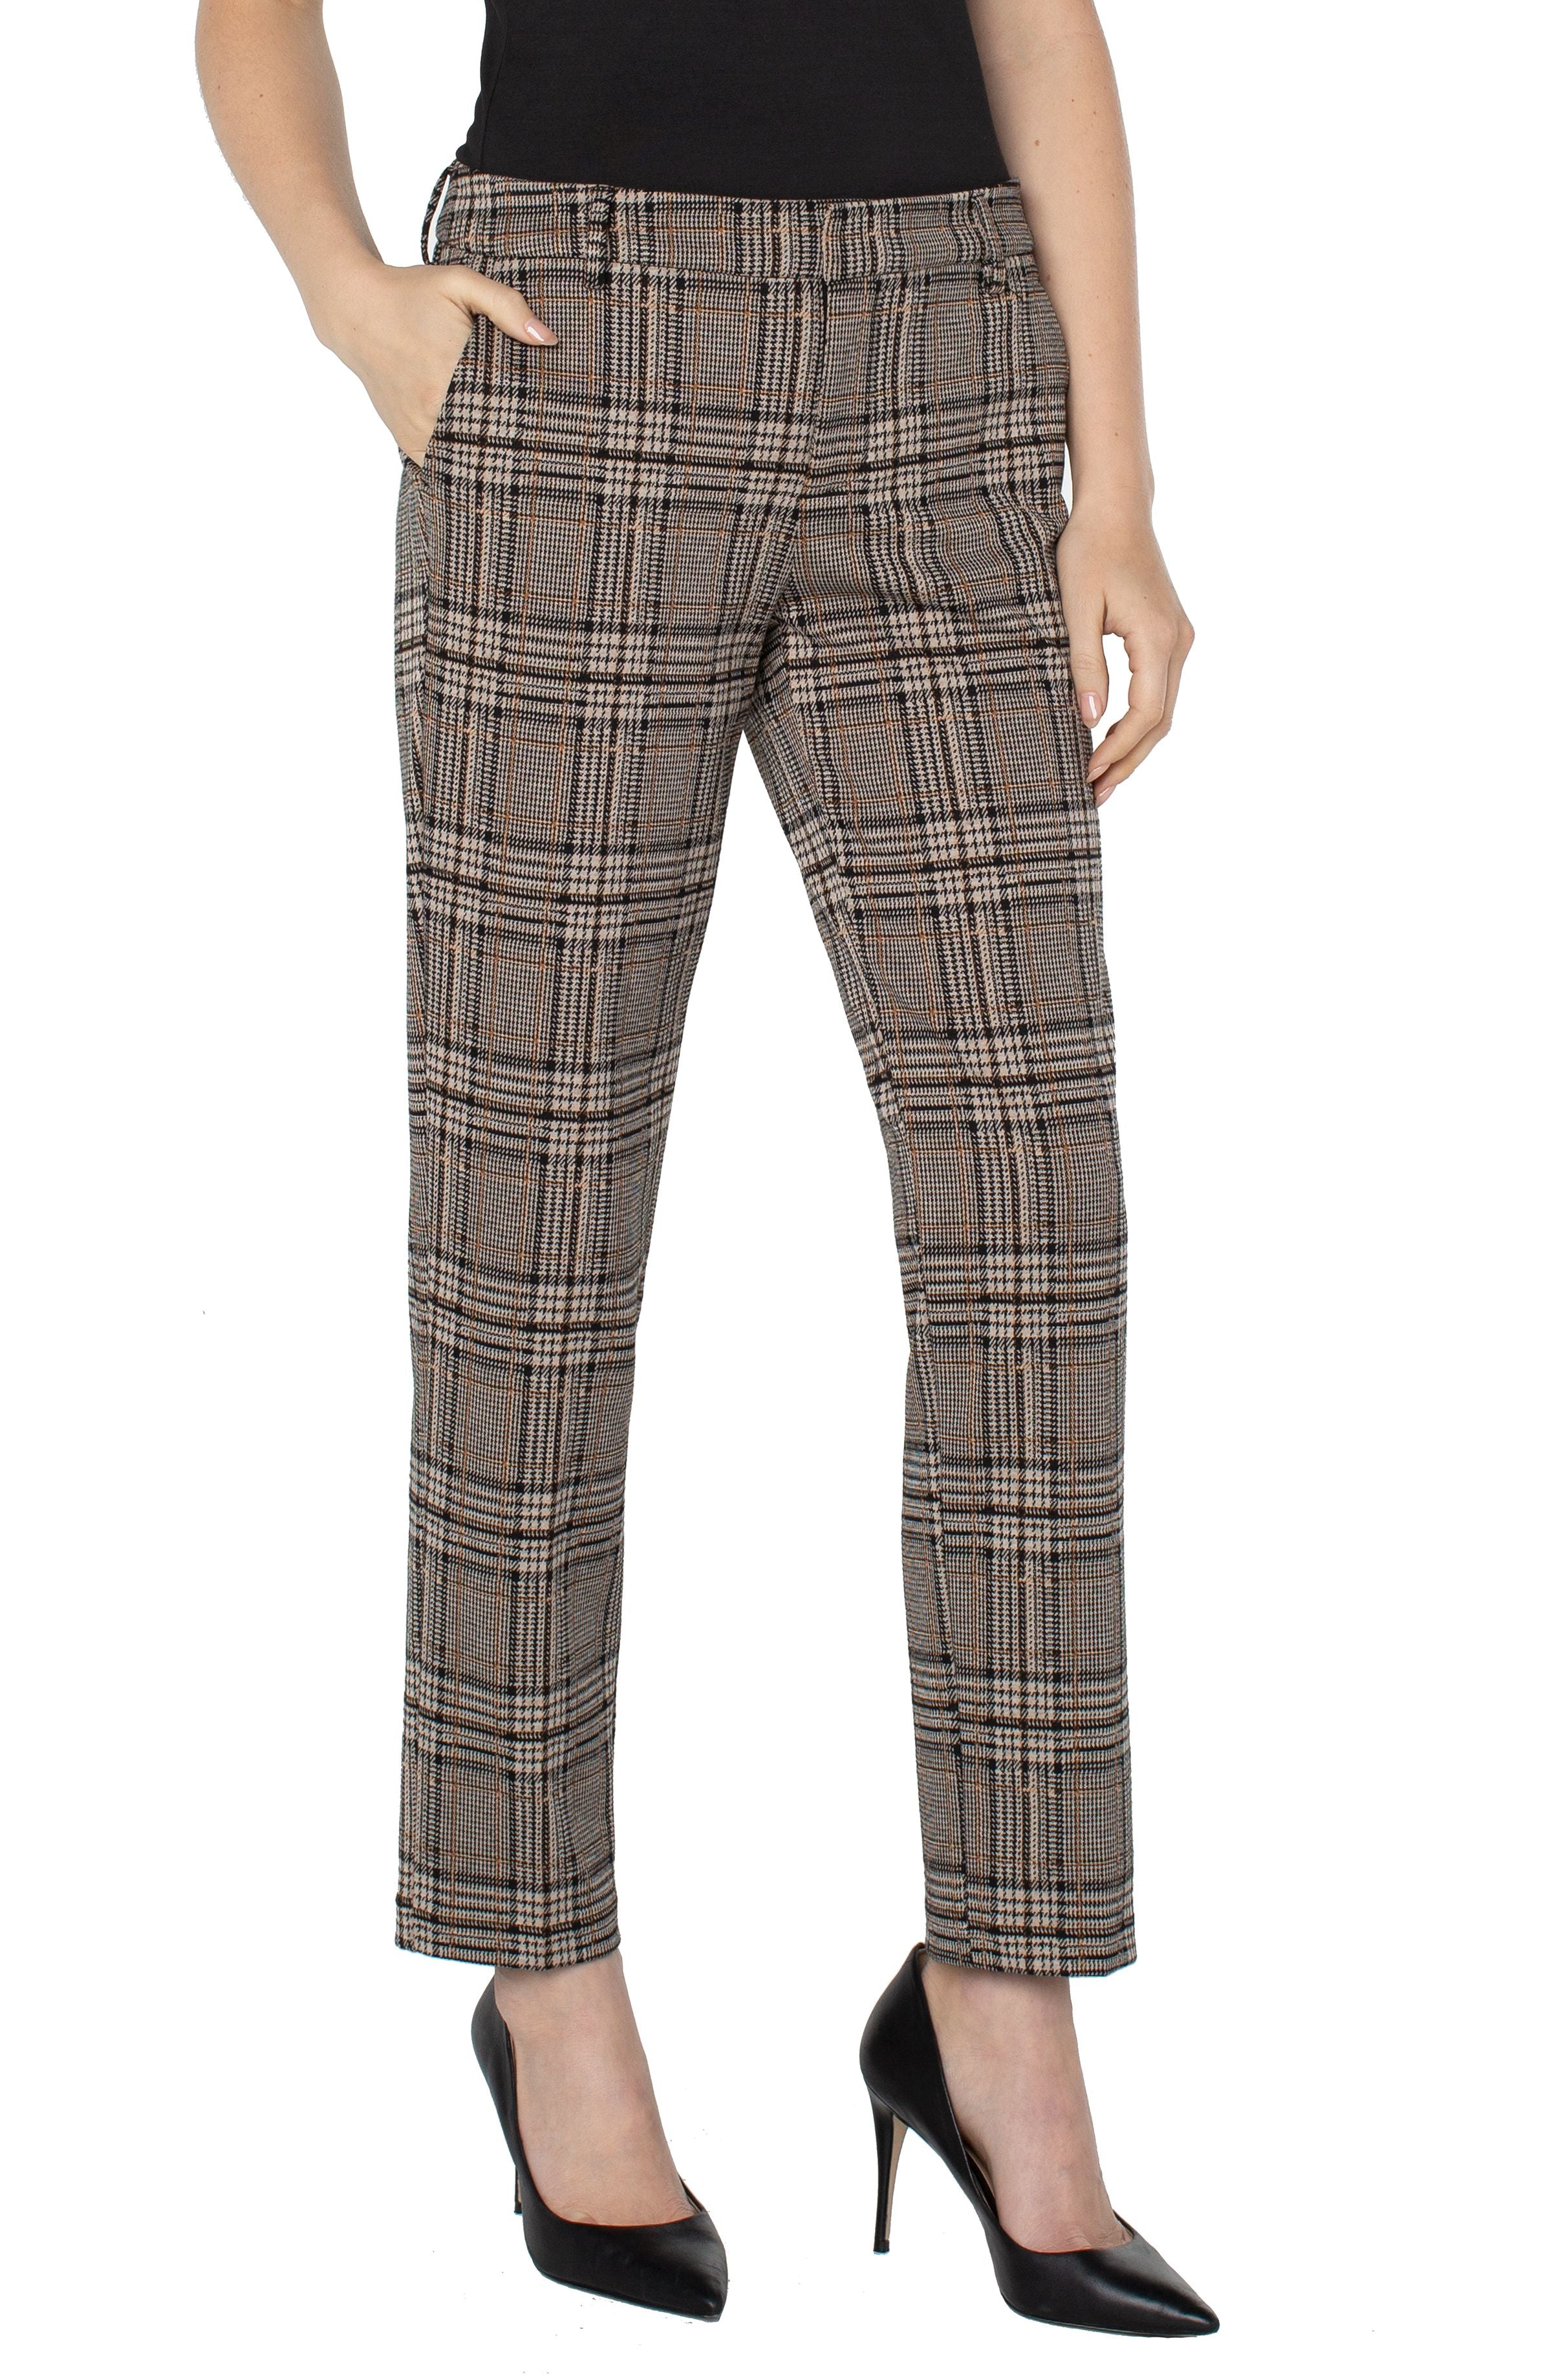 Bishop Tan Checkered Cropped Trousers  Fashion Fashion outfits Outfits